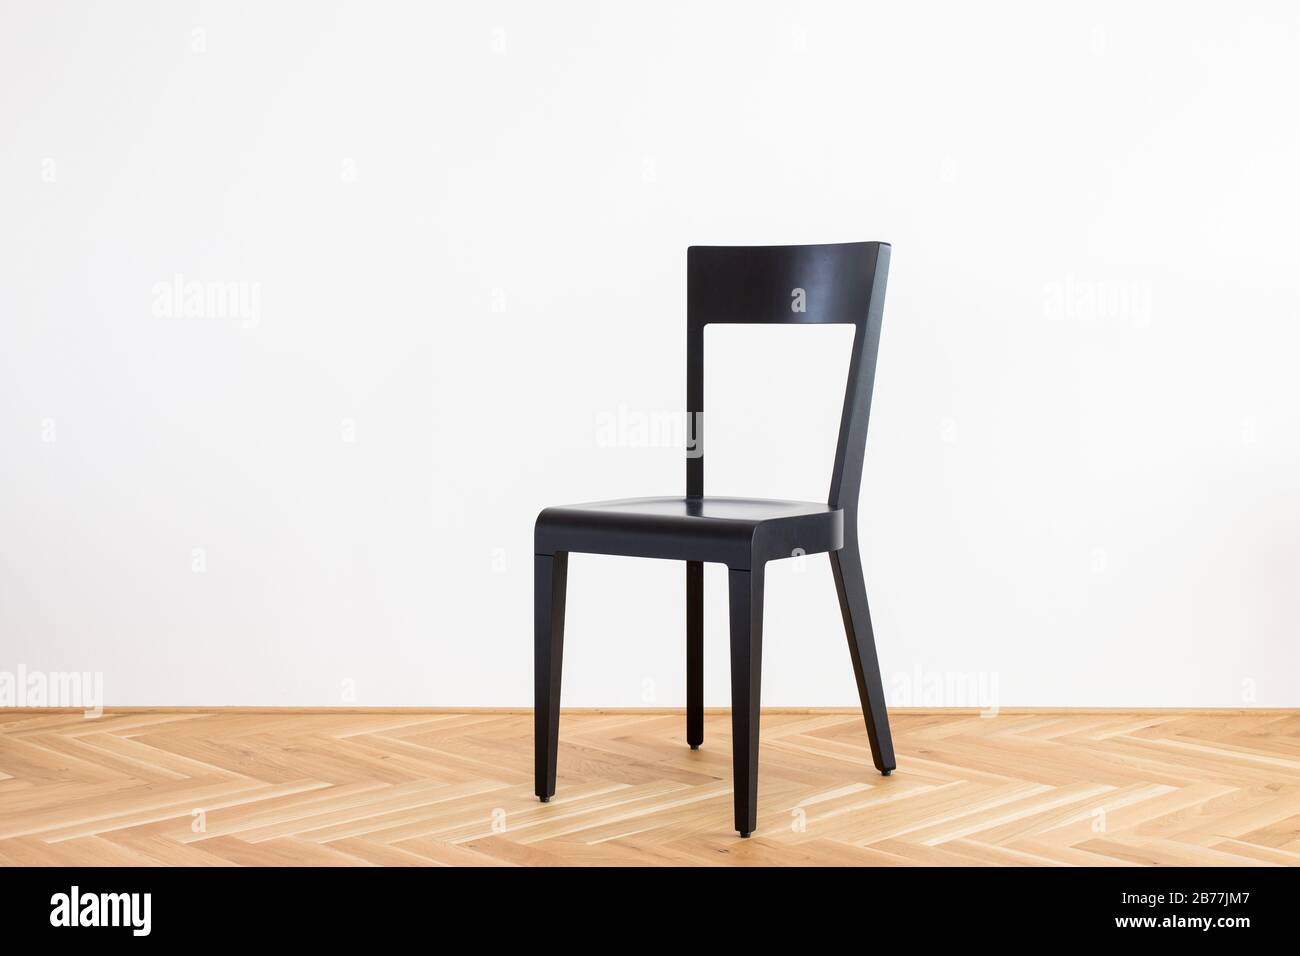 modern simplistic black chair on a wooden flor in front of white background Stock Photo